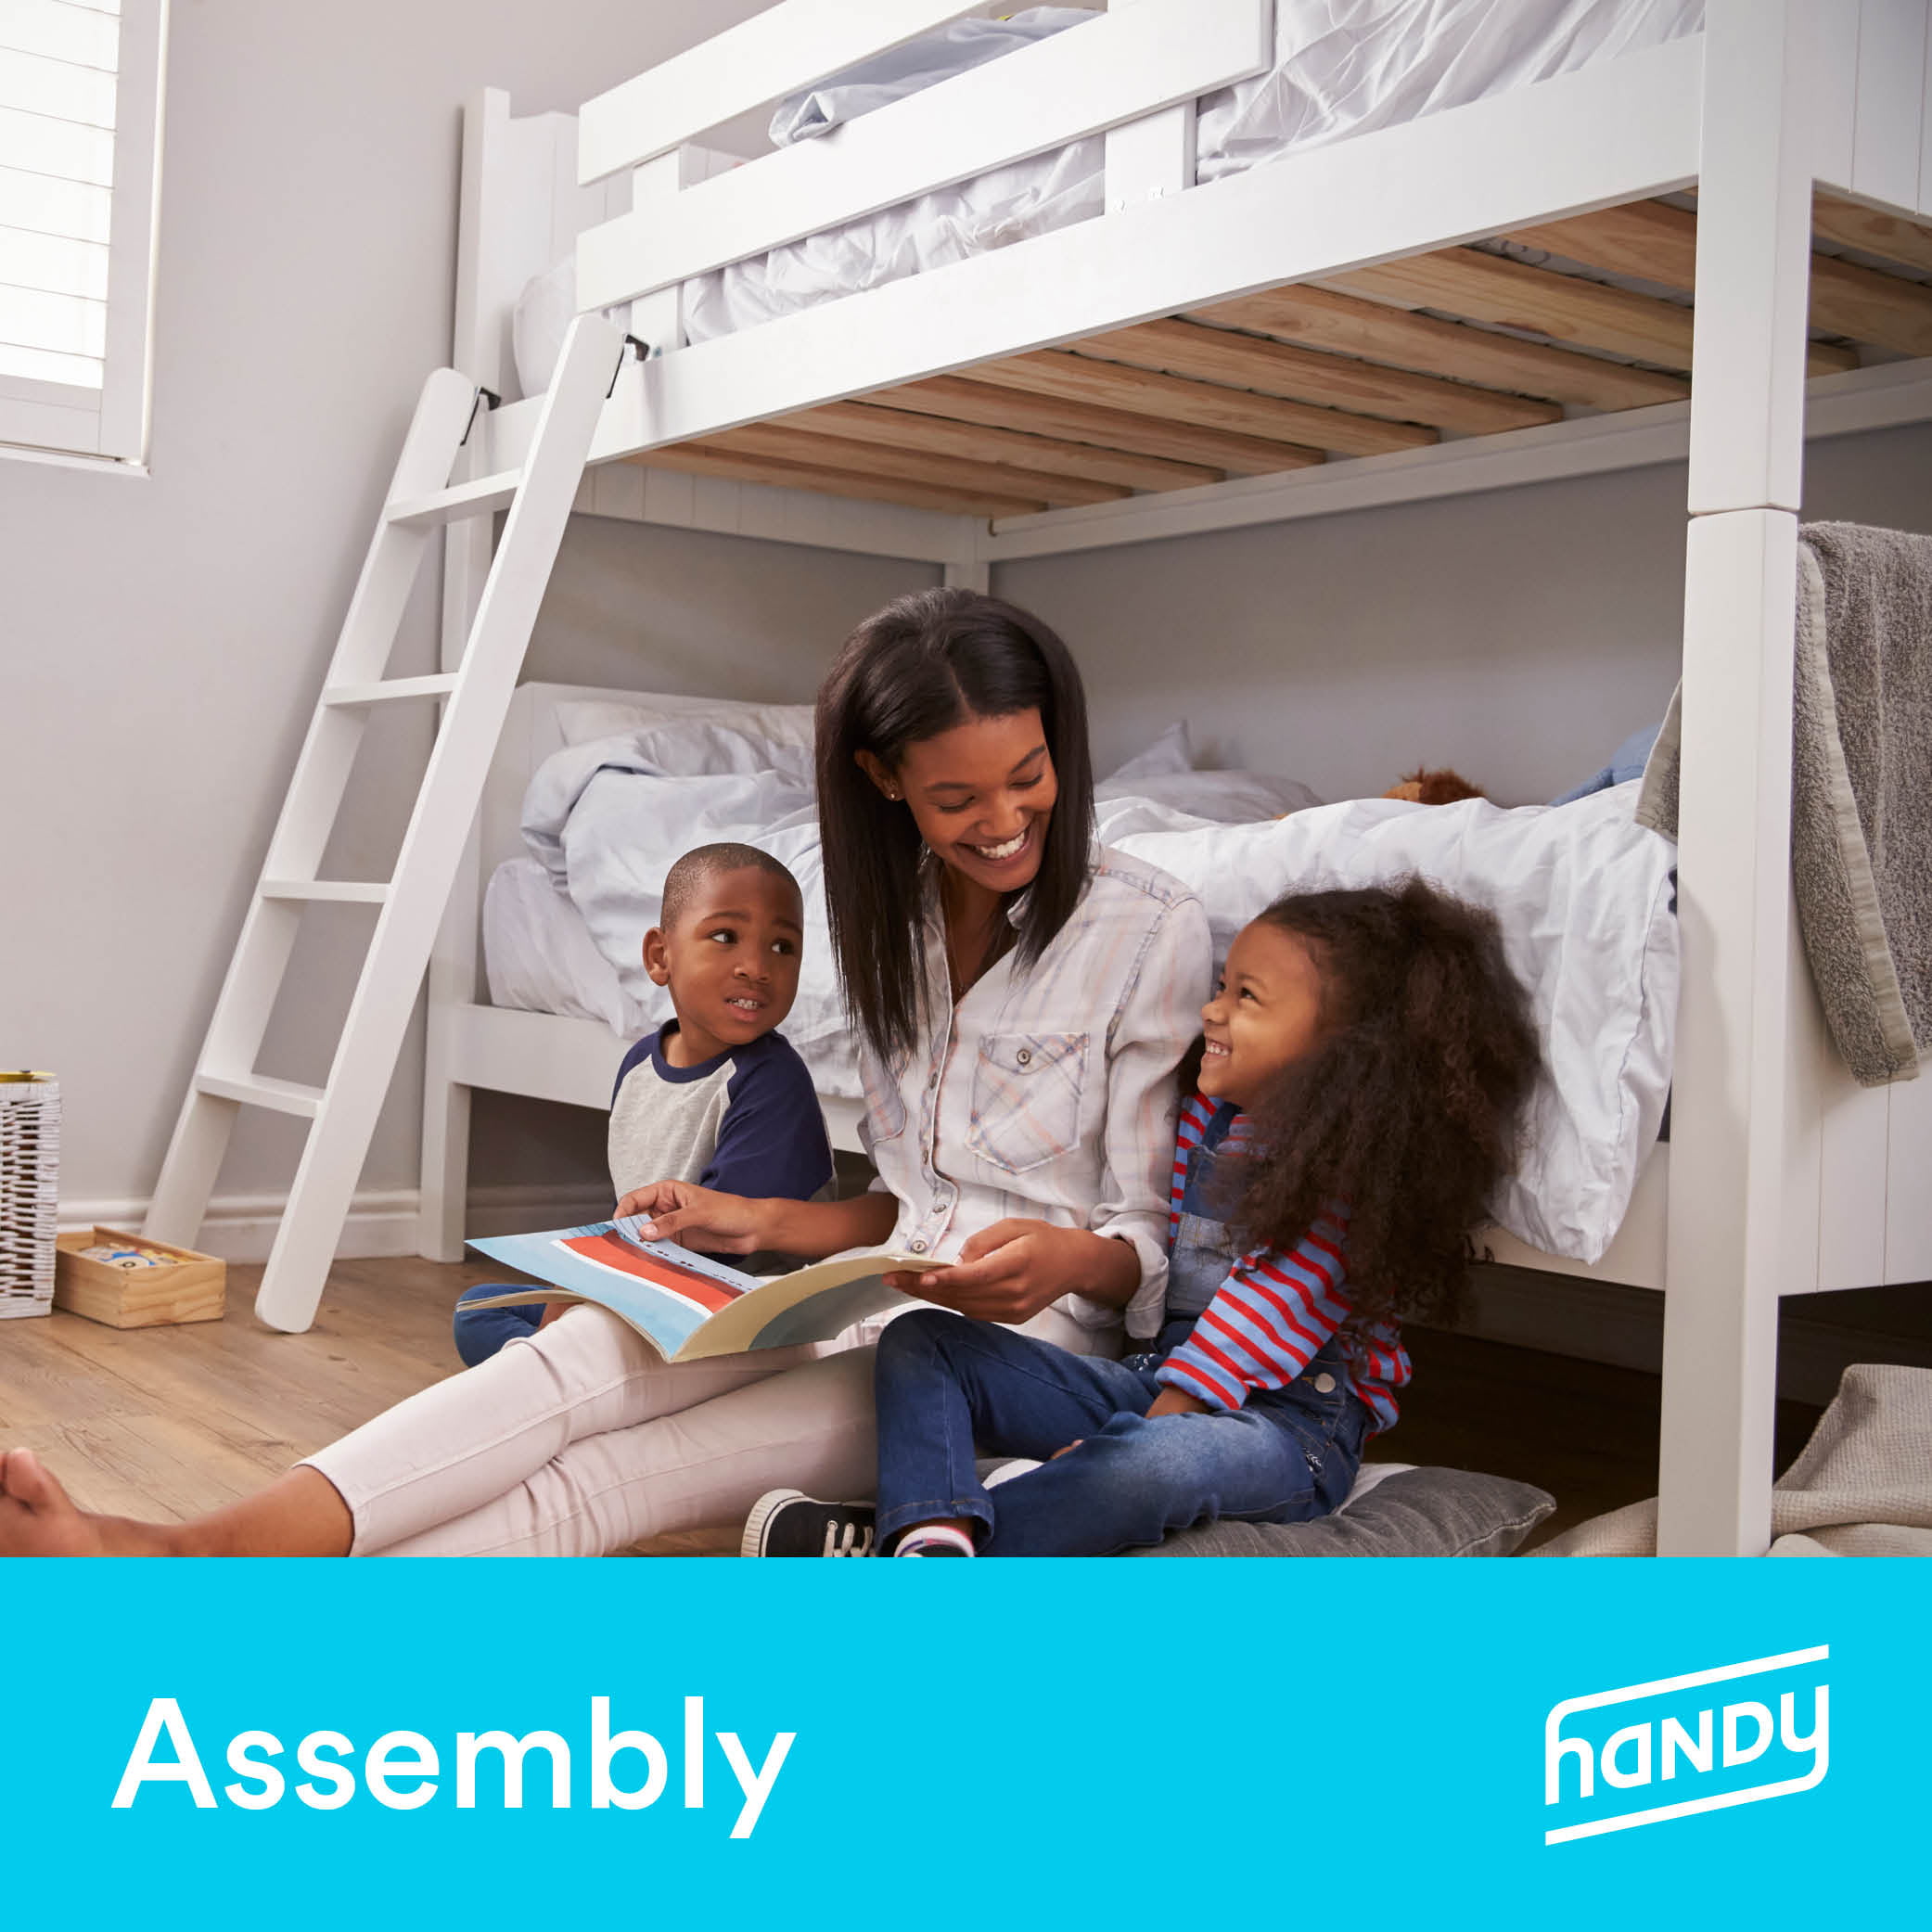 Bunk Bed Assembly By Handy Com, Lego Bunk Bed Instructions